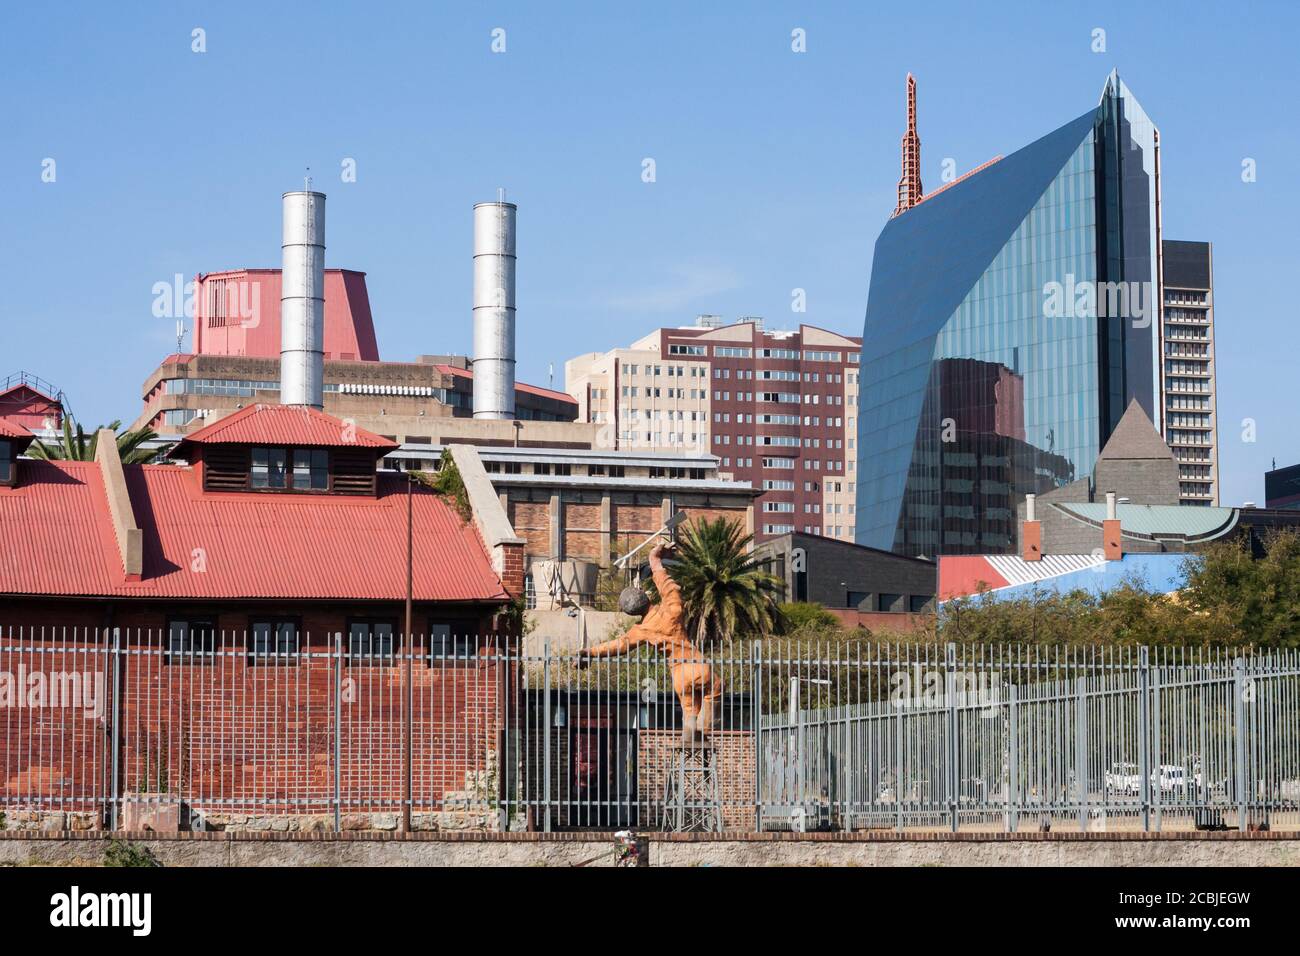 Newtown, Johannesburg, South Africa May 17 2015: view from the Worker's Museum of the skyline of Newtown, Johannesburg. Stock Photo